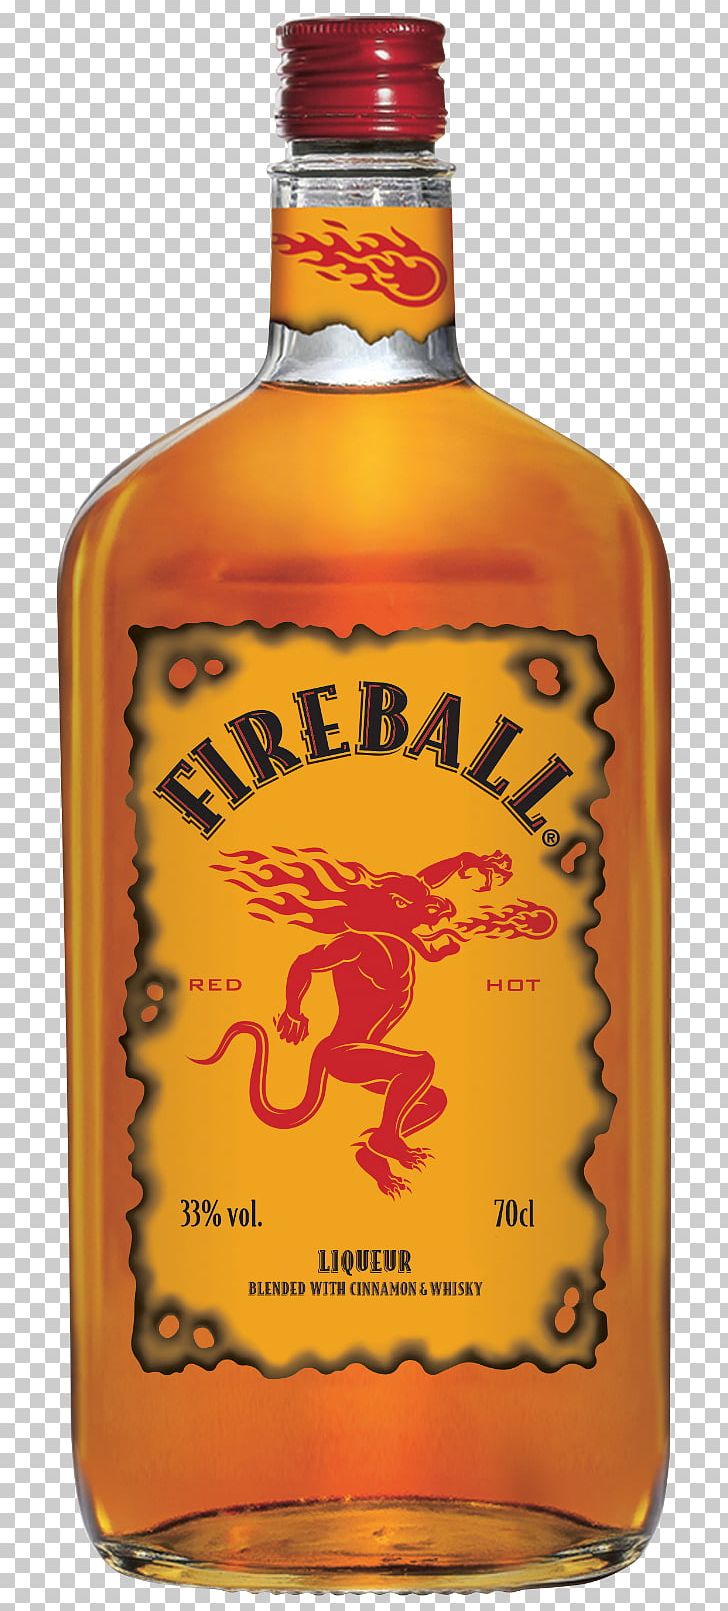 Fireball Cinnamon Whisky Distilled Beverage Whiskey Canadian Whisky Liqueur PNG, Clipart, Canadian Whisky, Distilled Beverage, Fireball Cinnamon Whisky, Liqueur, Spirit Free PNG Download